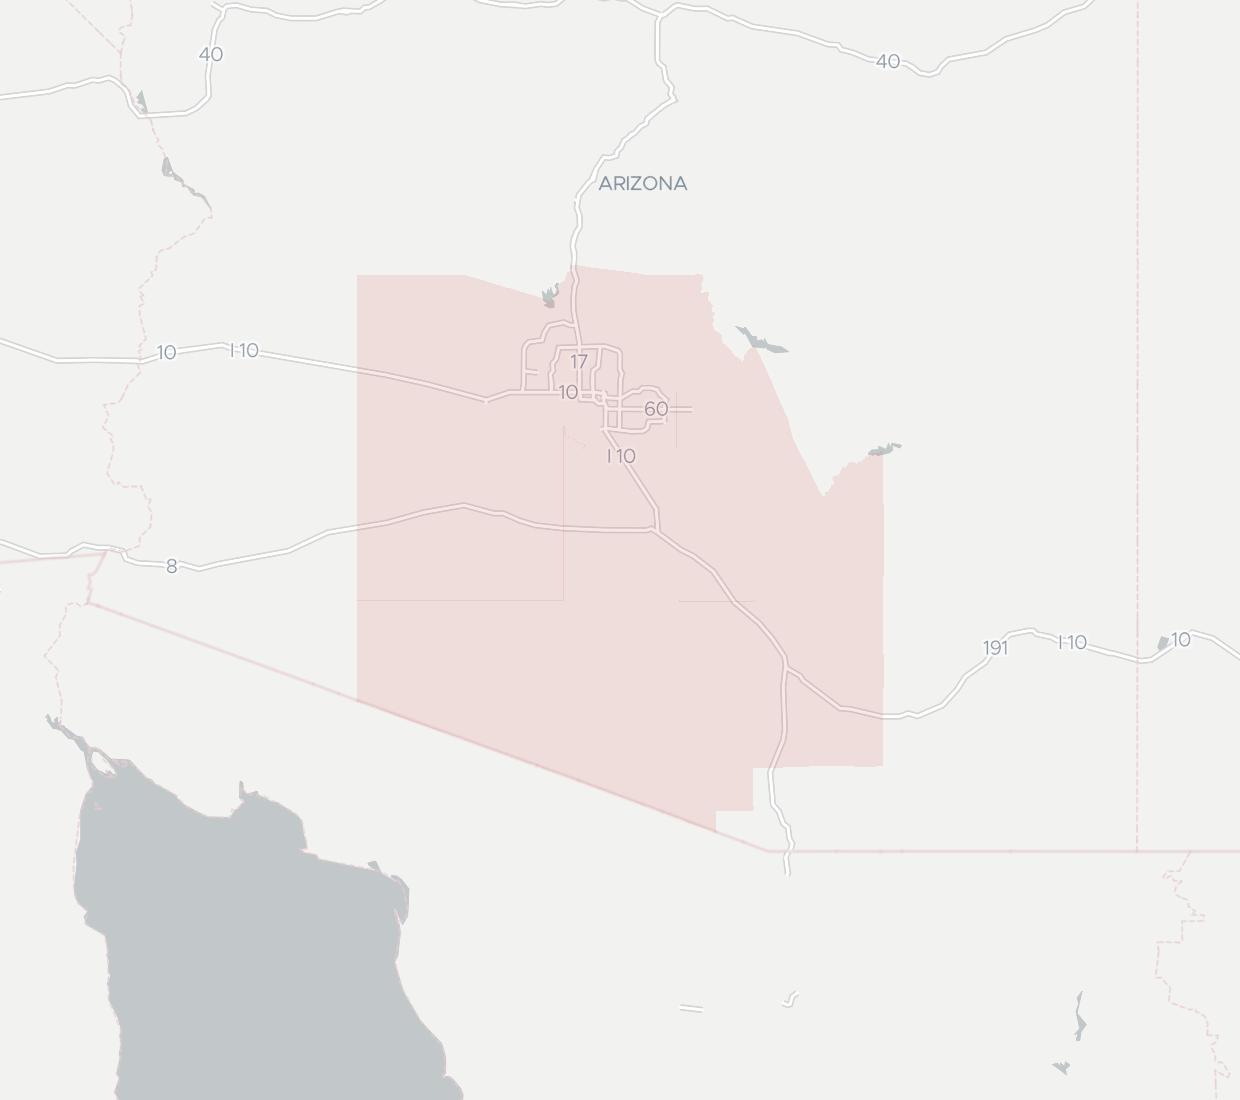 Tohono O'odham Utility Authority Availability Map. Click for interactive map